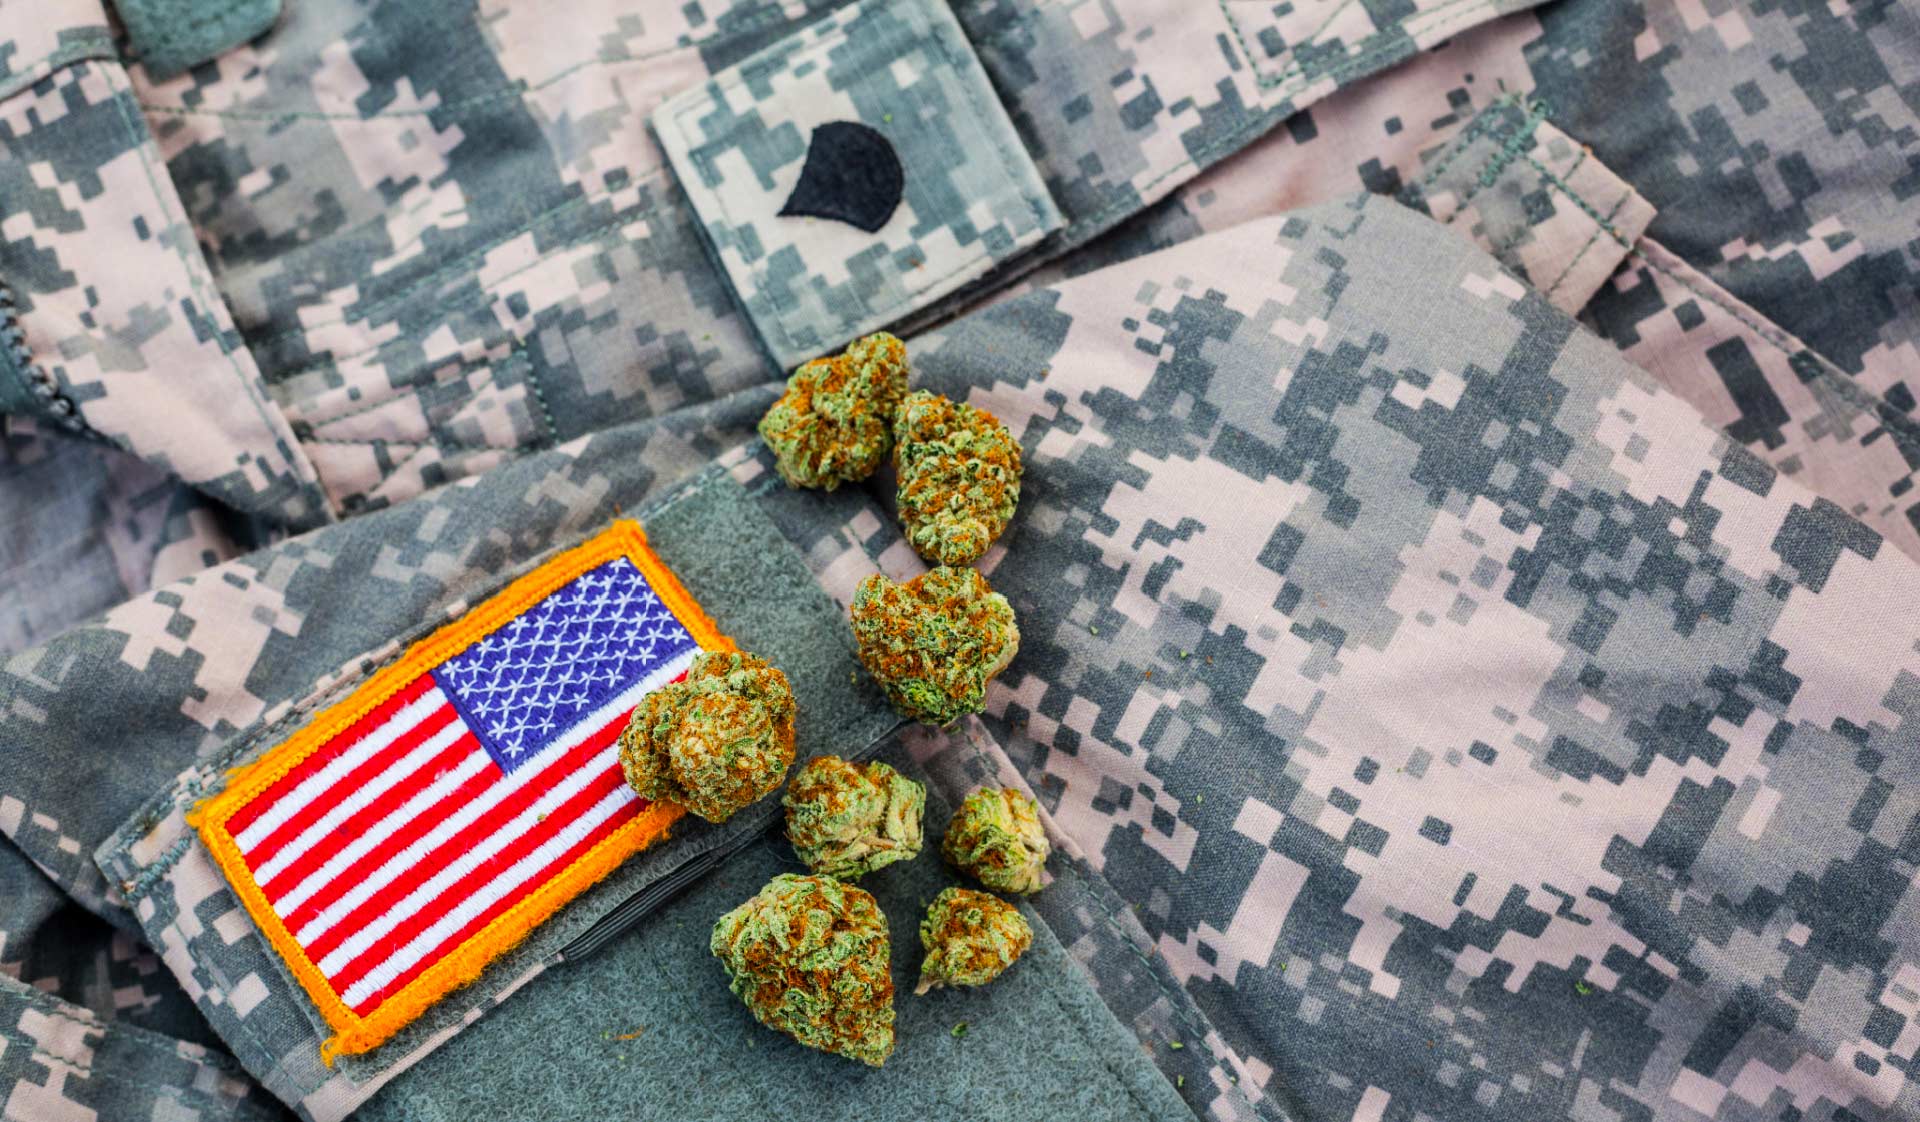 Close up of military field jacket and American flag patch with cannabis flower on top.